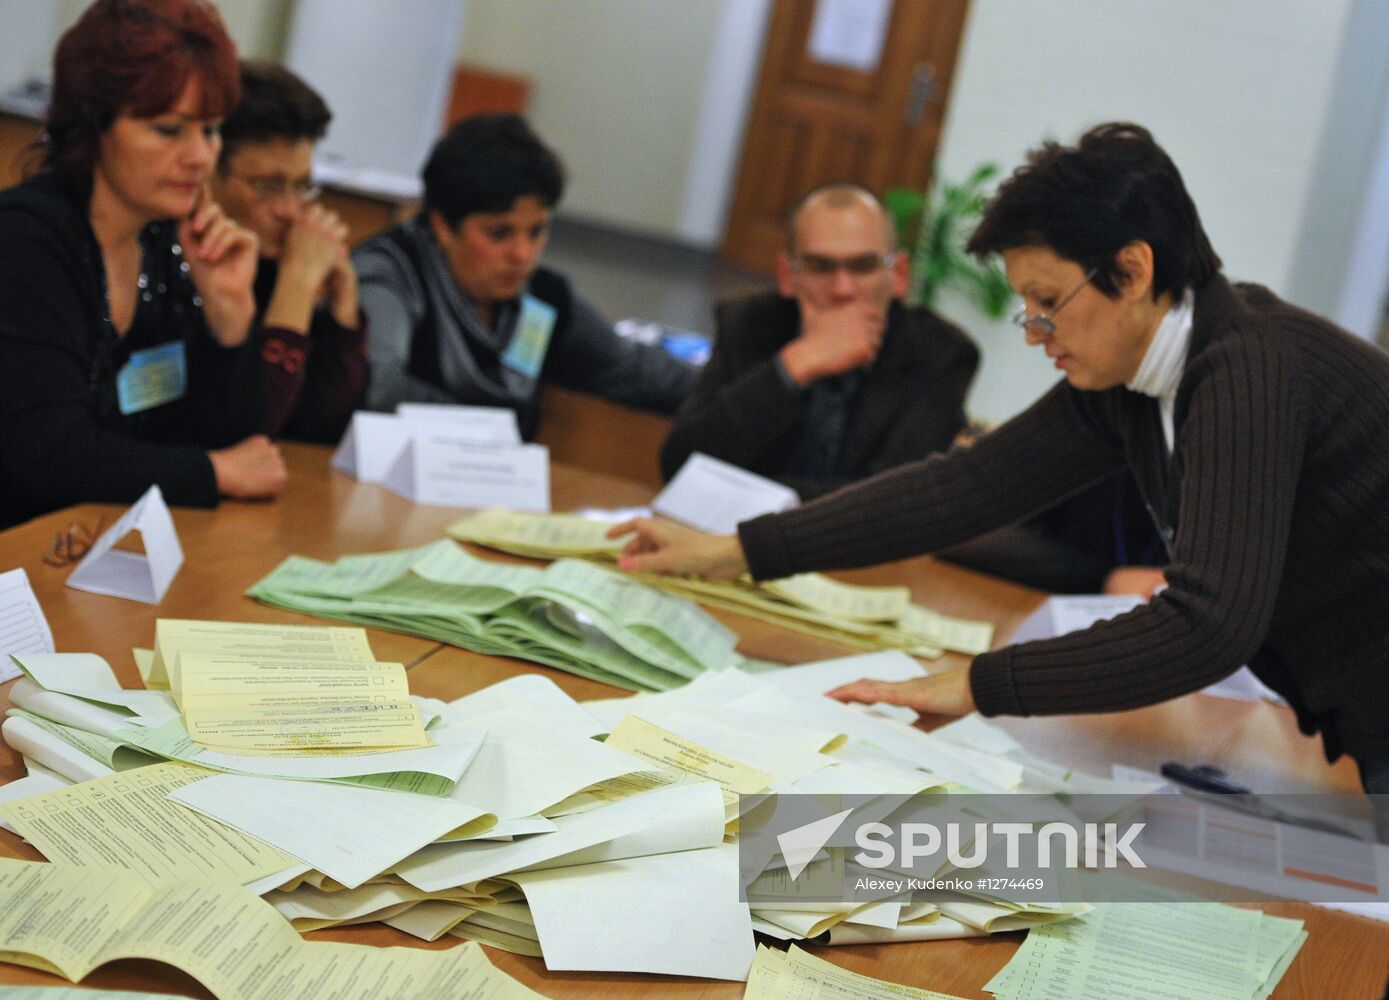 Counting votes in parliamentary elections in Ukraine